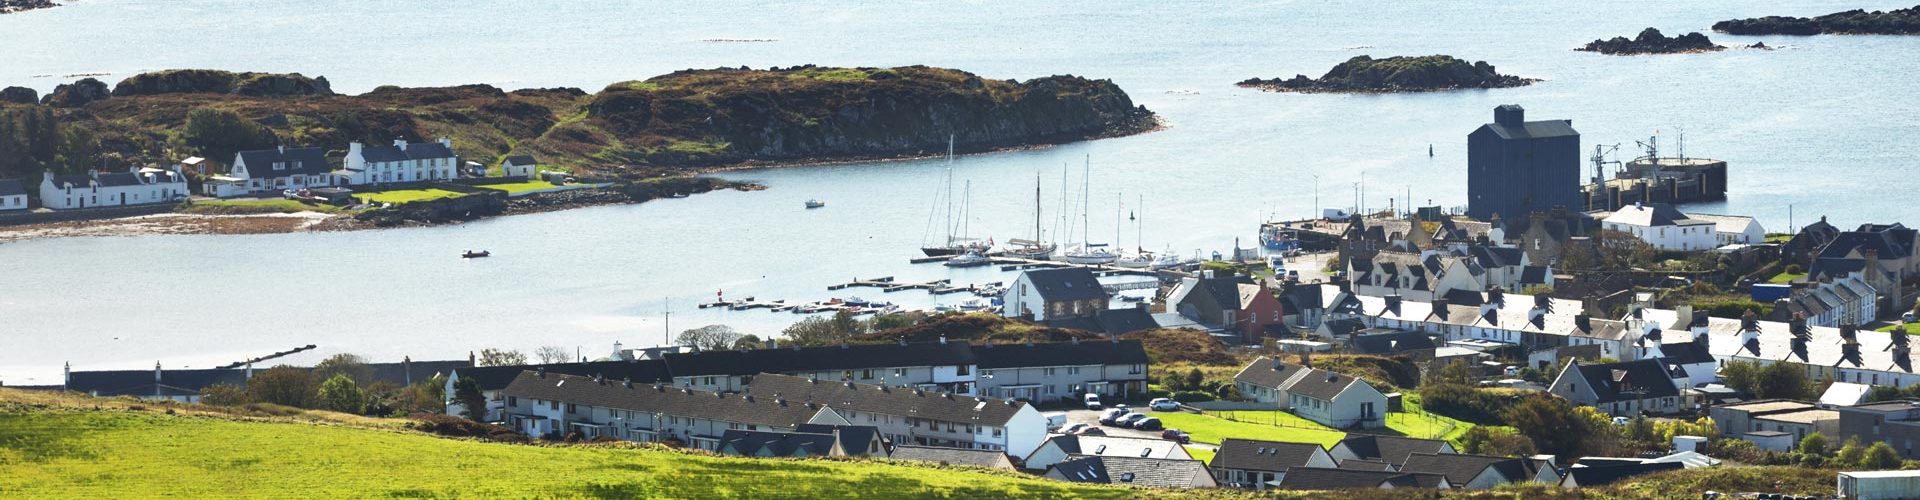 Aerial view of Port Ellen on the isle of Islay